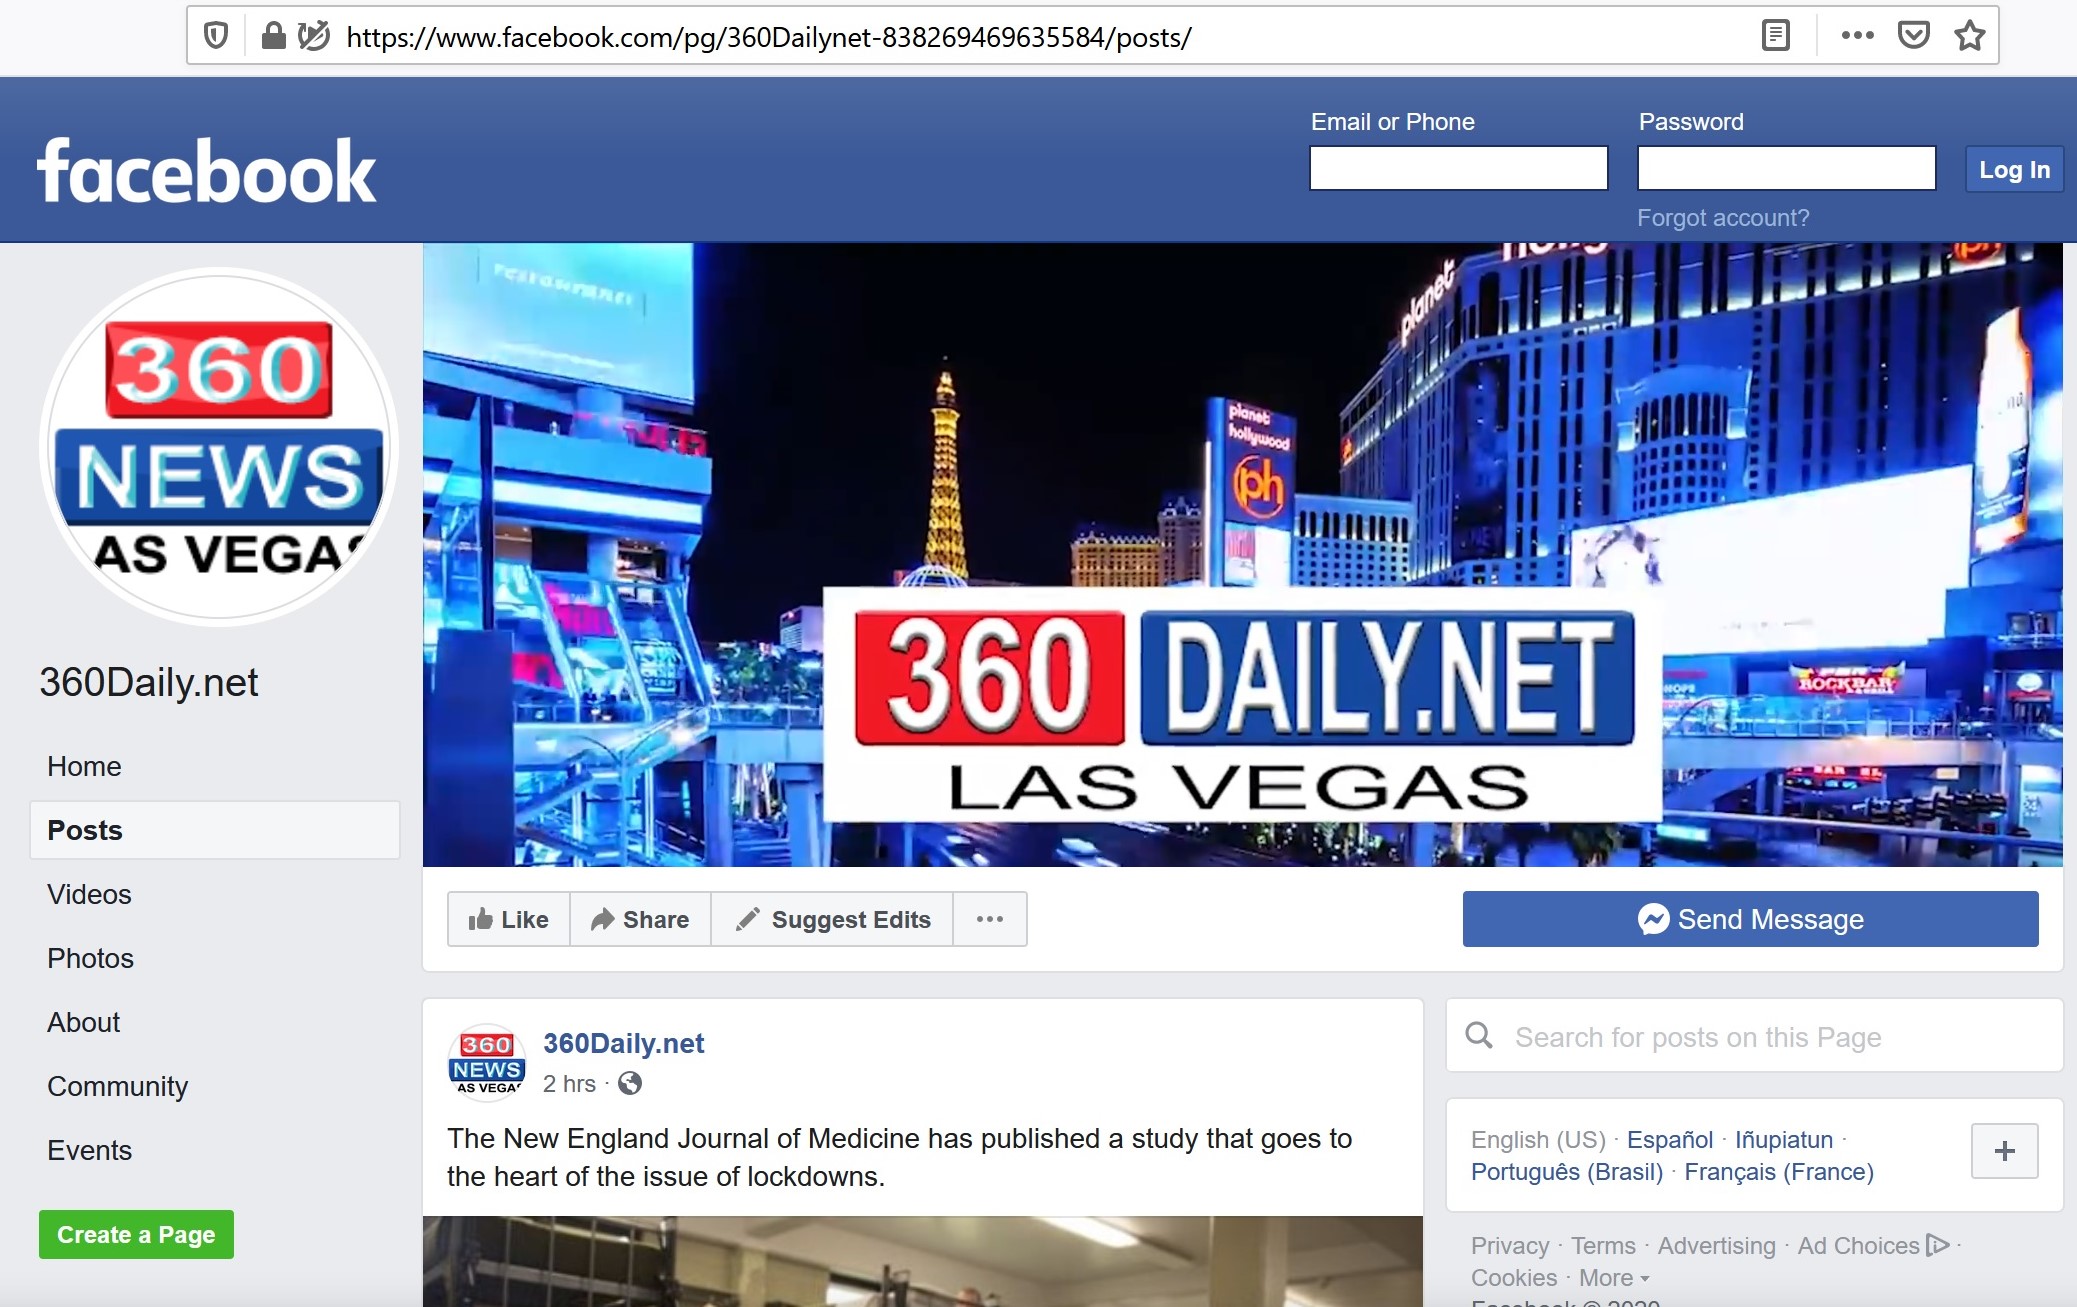 Linked Facebook page and header video